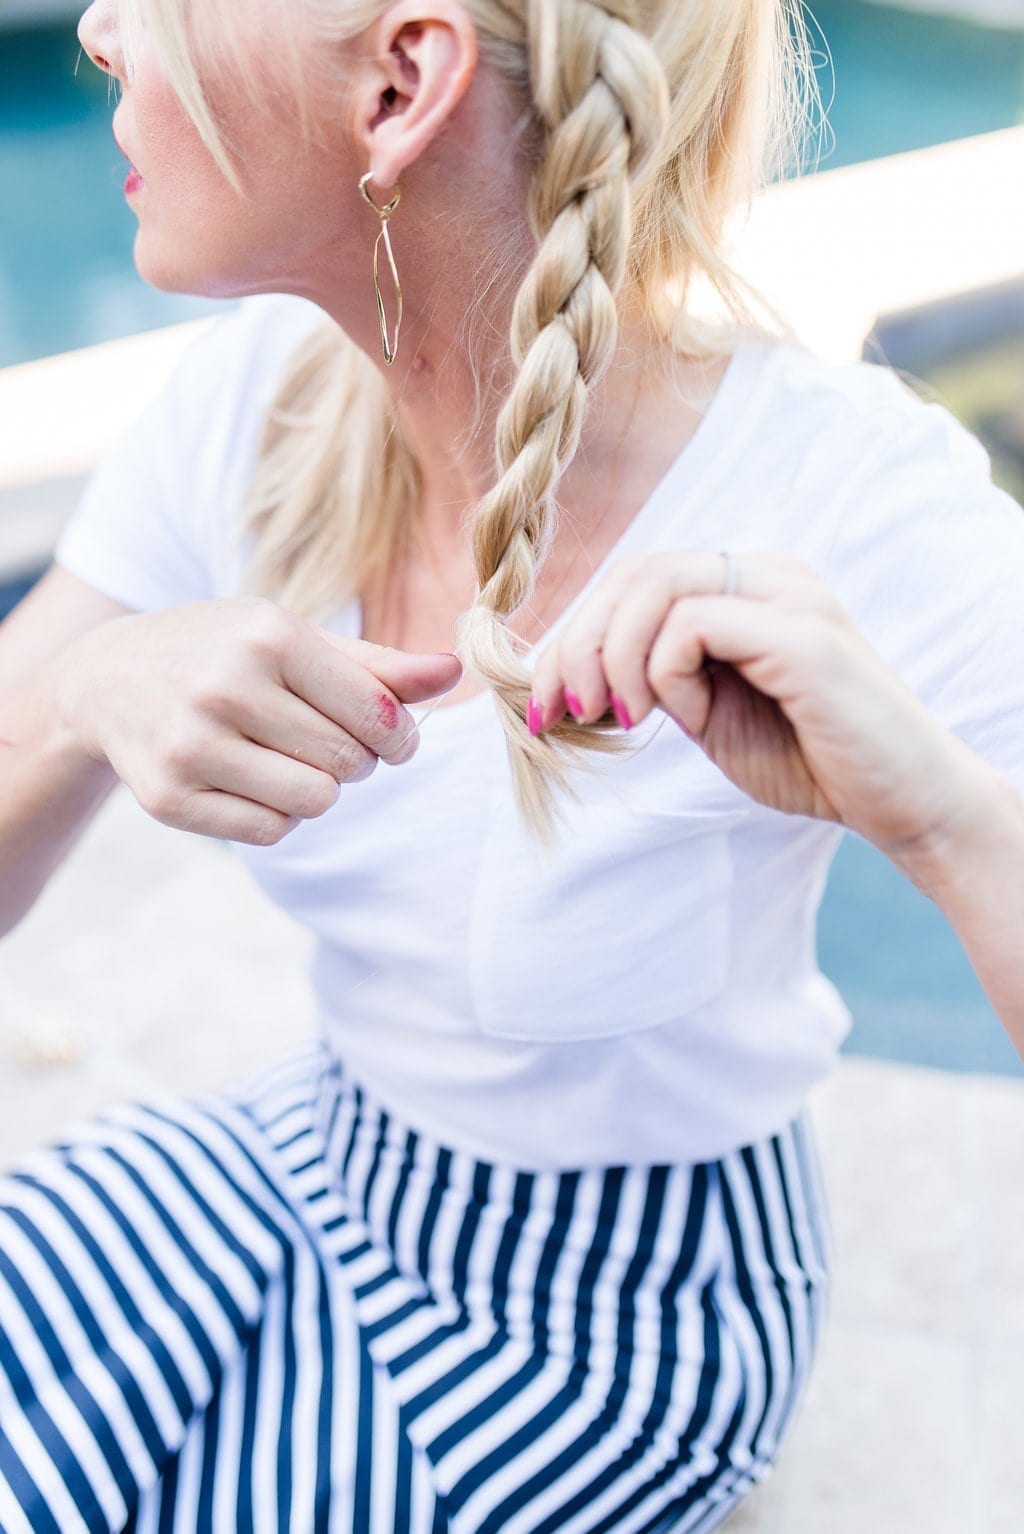 How to braid your own hair. Tips to braiding your own long hair.